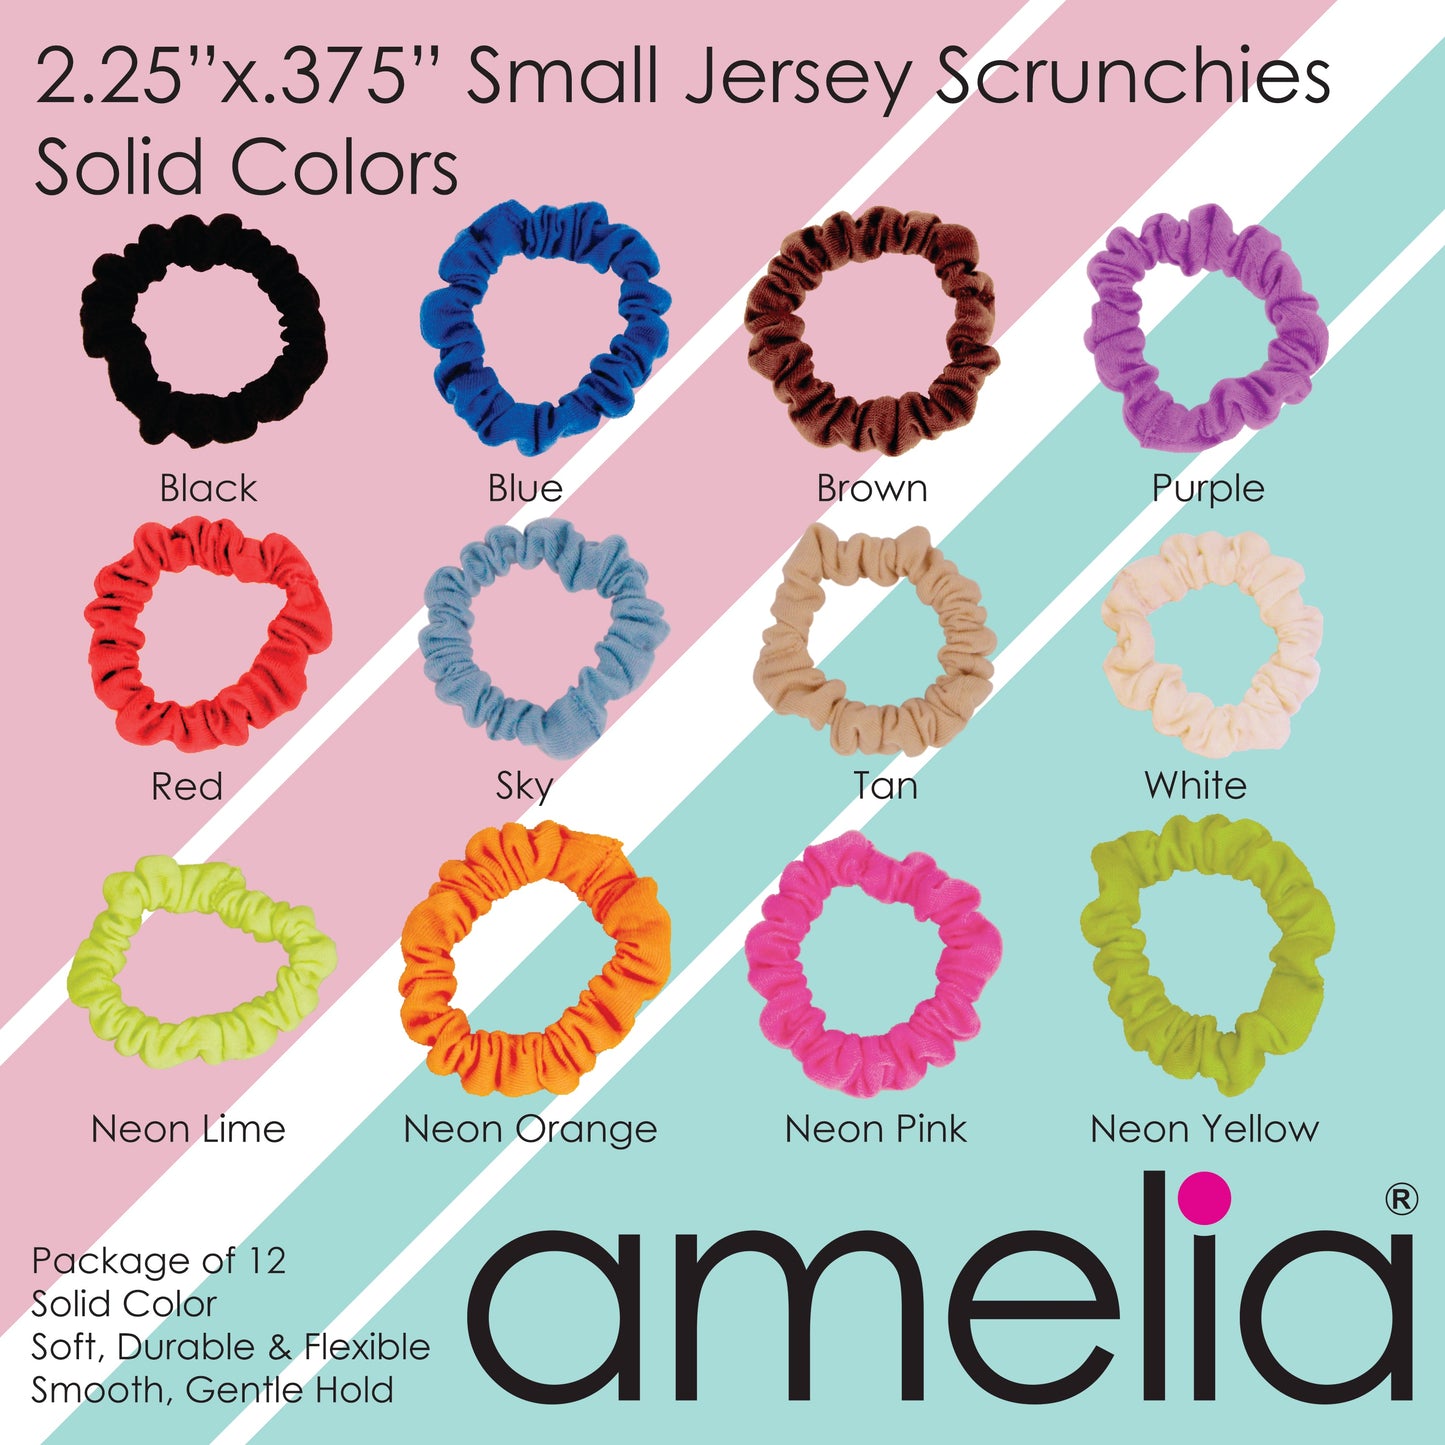 Amelia Beauty, Neon Orange Jersey Scrunchies, 2.25in Diameter, Gentle on Hair, Strong Hold, No Snag, No Dents or Creases. 12 Pack